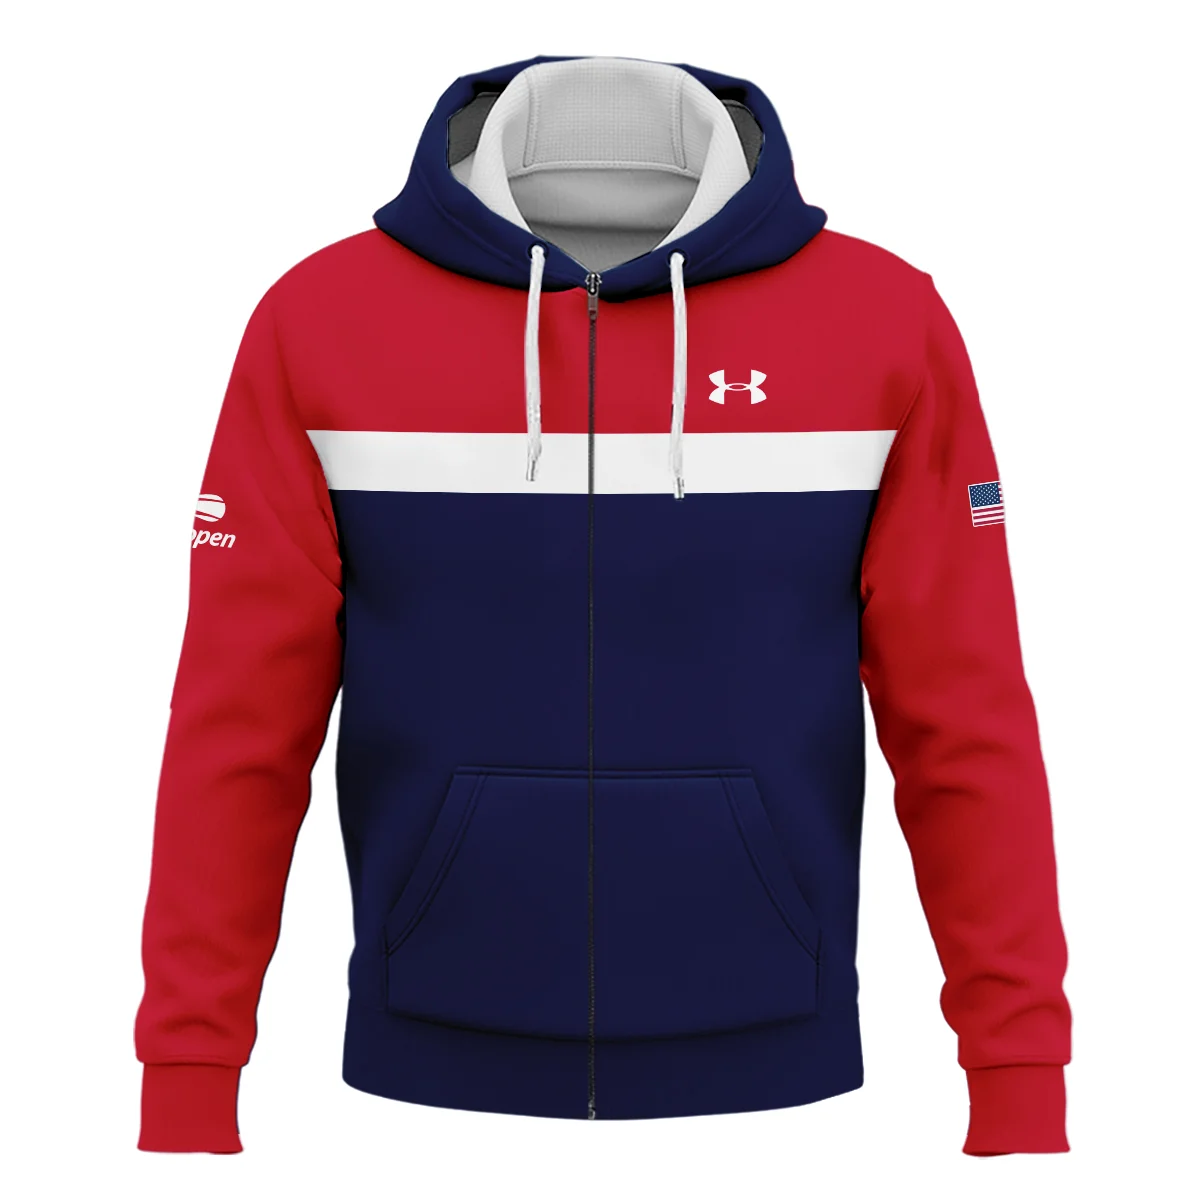 Under Armour Blue Red White Background US Open Tennis Champions Zipper Hoodie Shirt Style Classic Zipper Hoodie Shirt